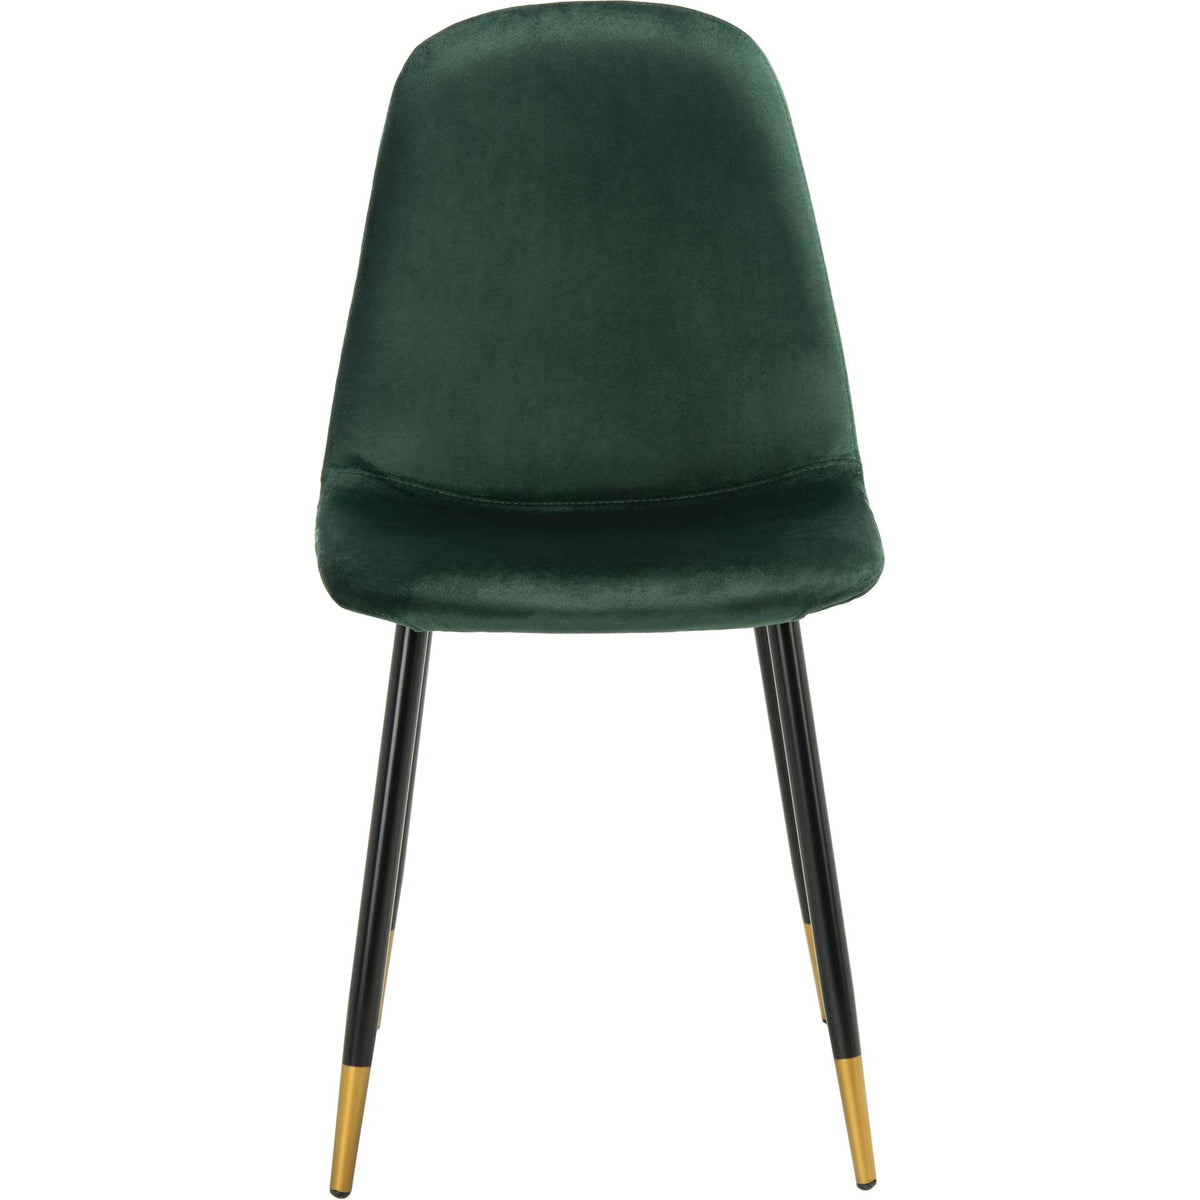 Blaize Dining Chair Green/Black (Set of 2)